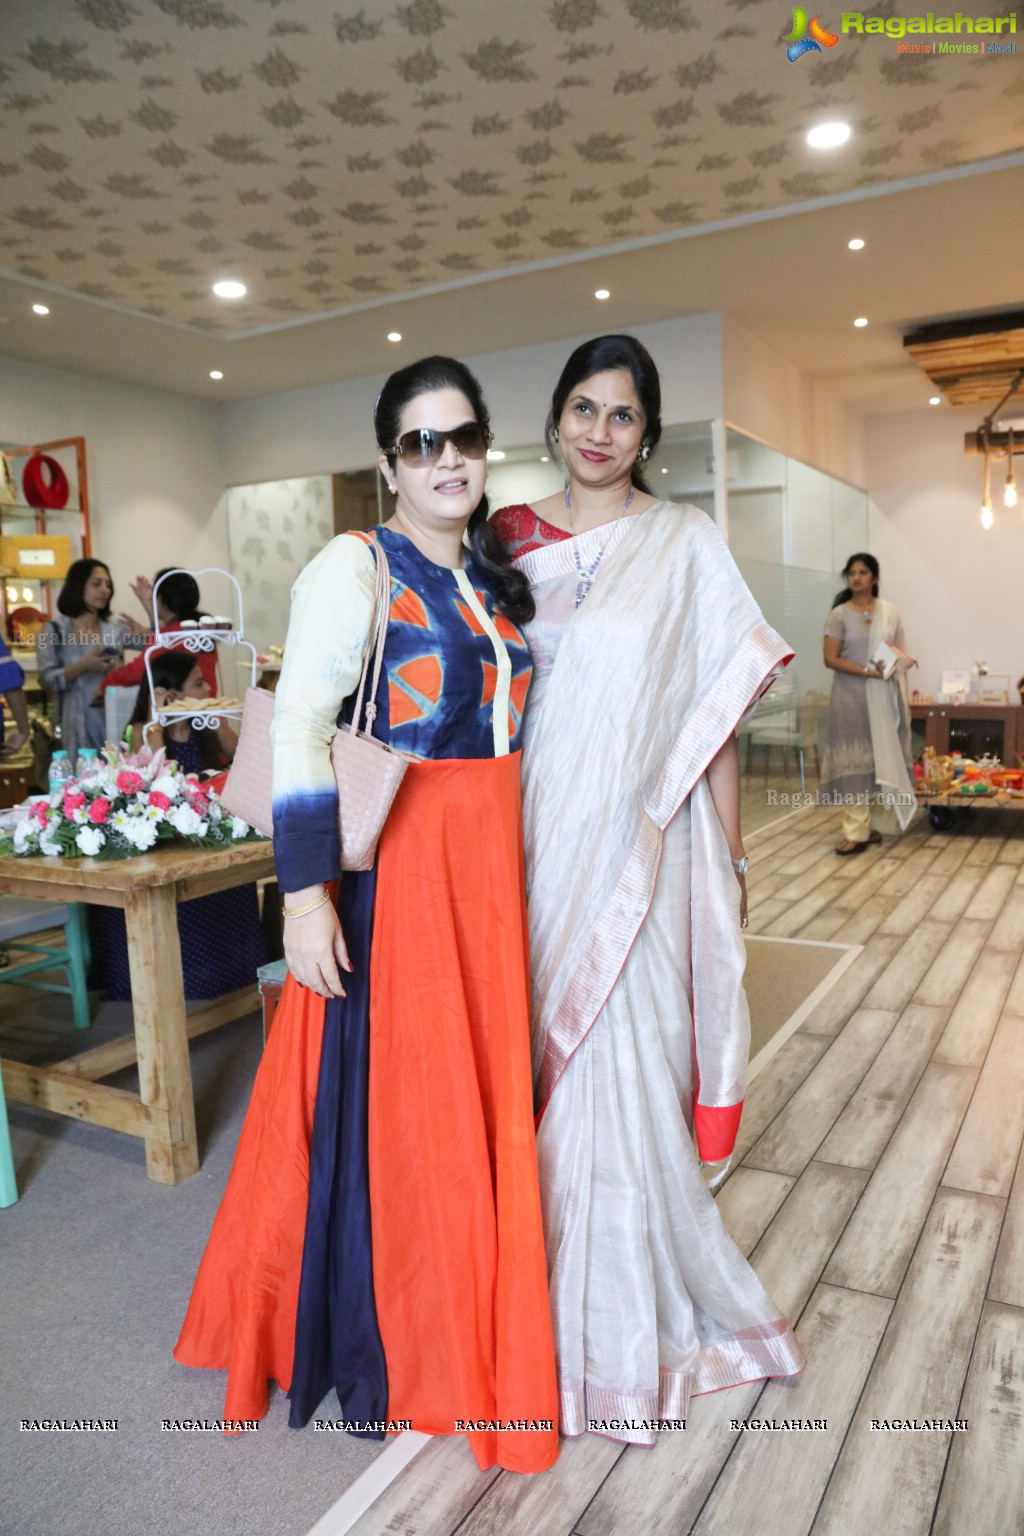 Happiness Trunk Festive Collection 2018 Launch